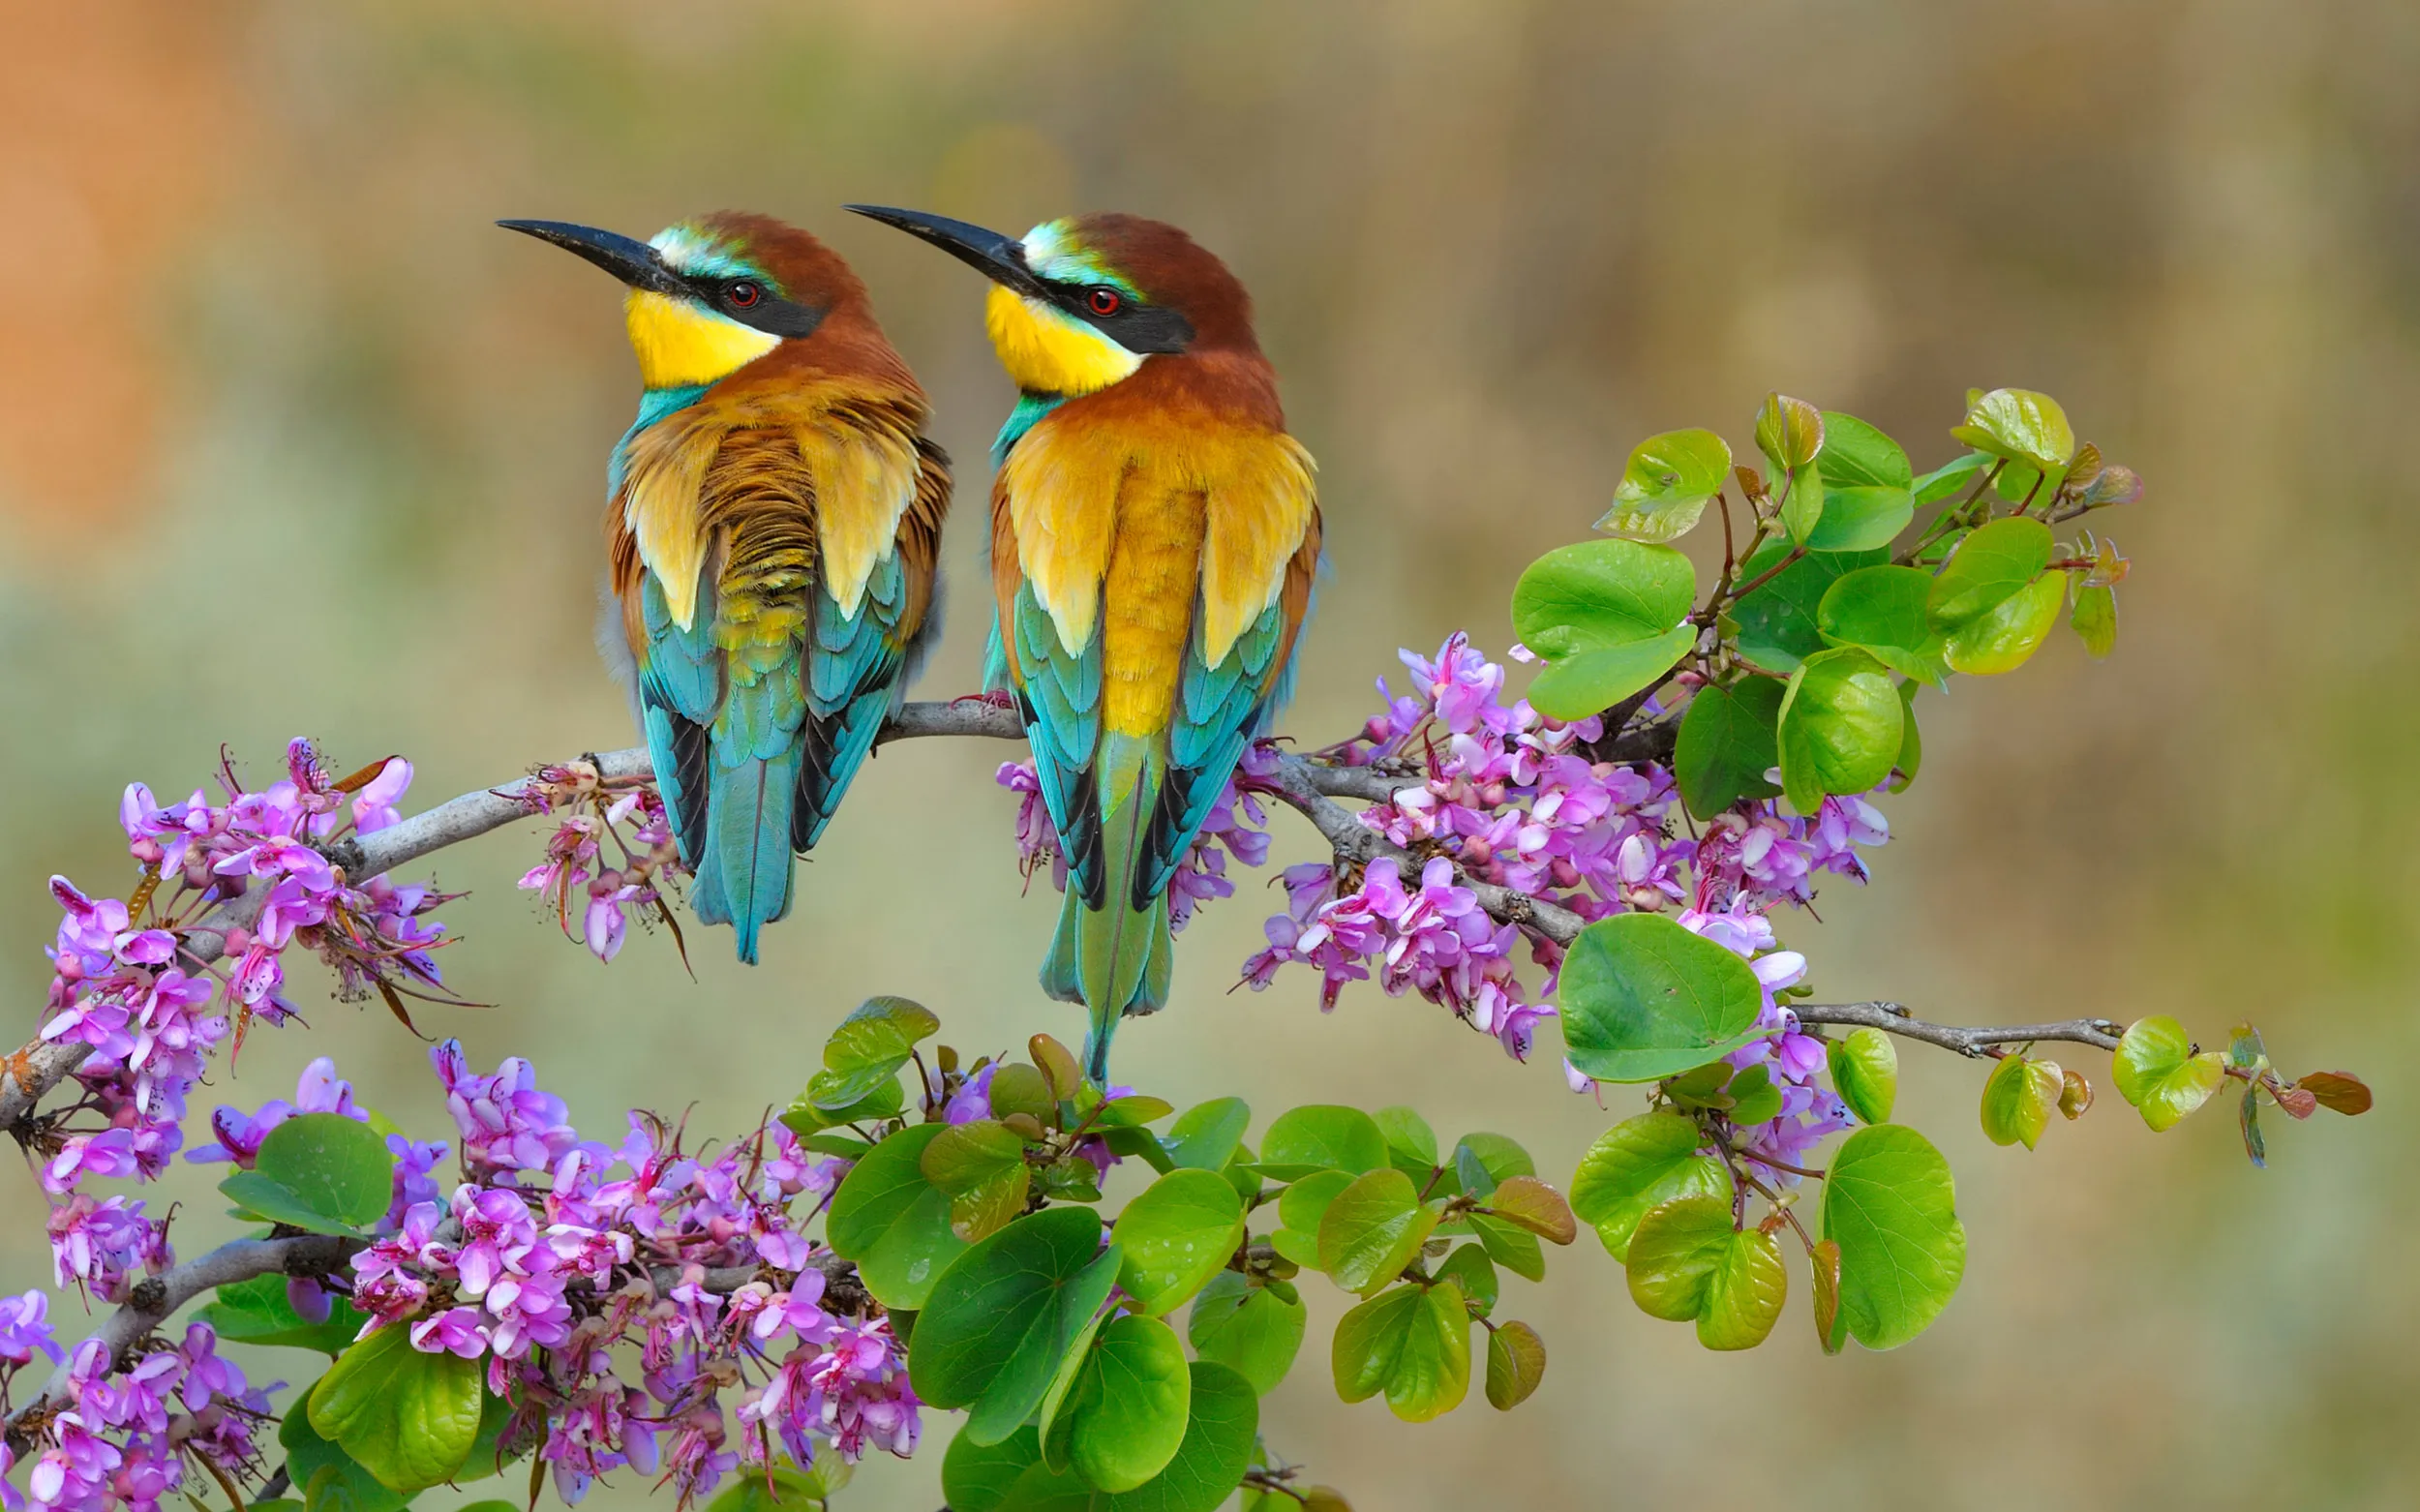 A pair of Bee-eaters perched on a branch surrounded by purple flowers.